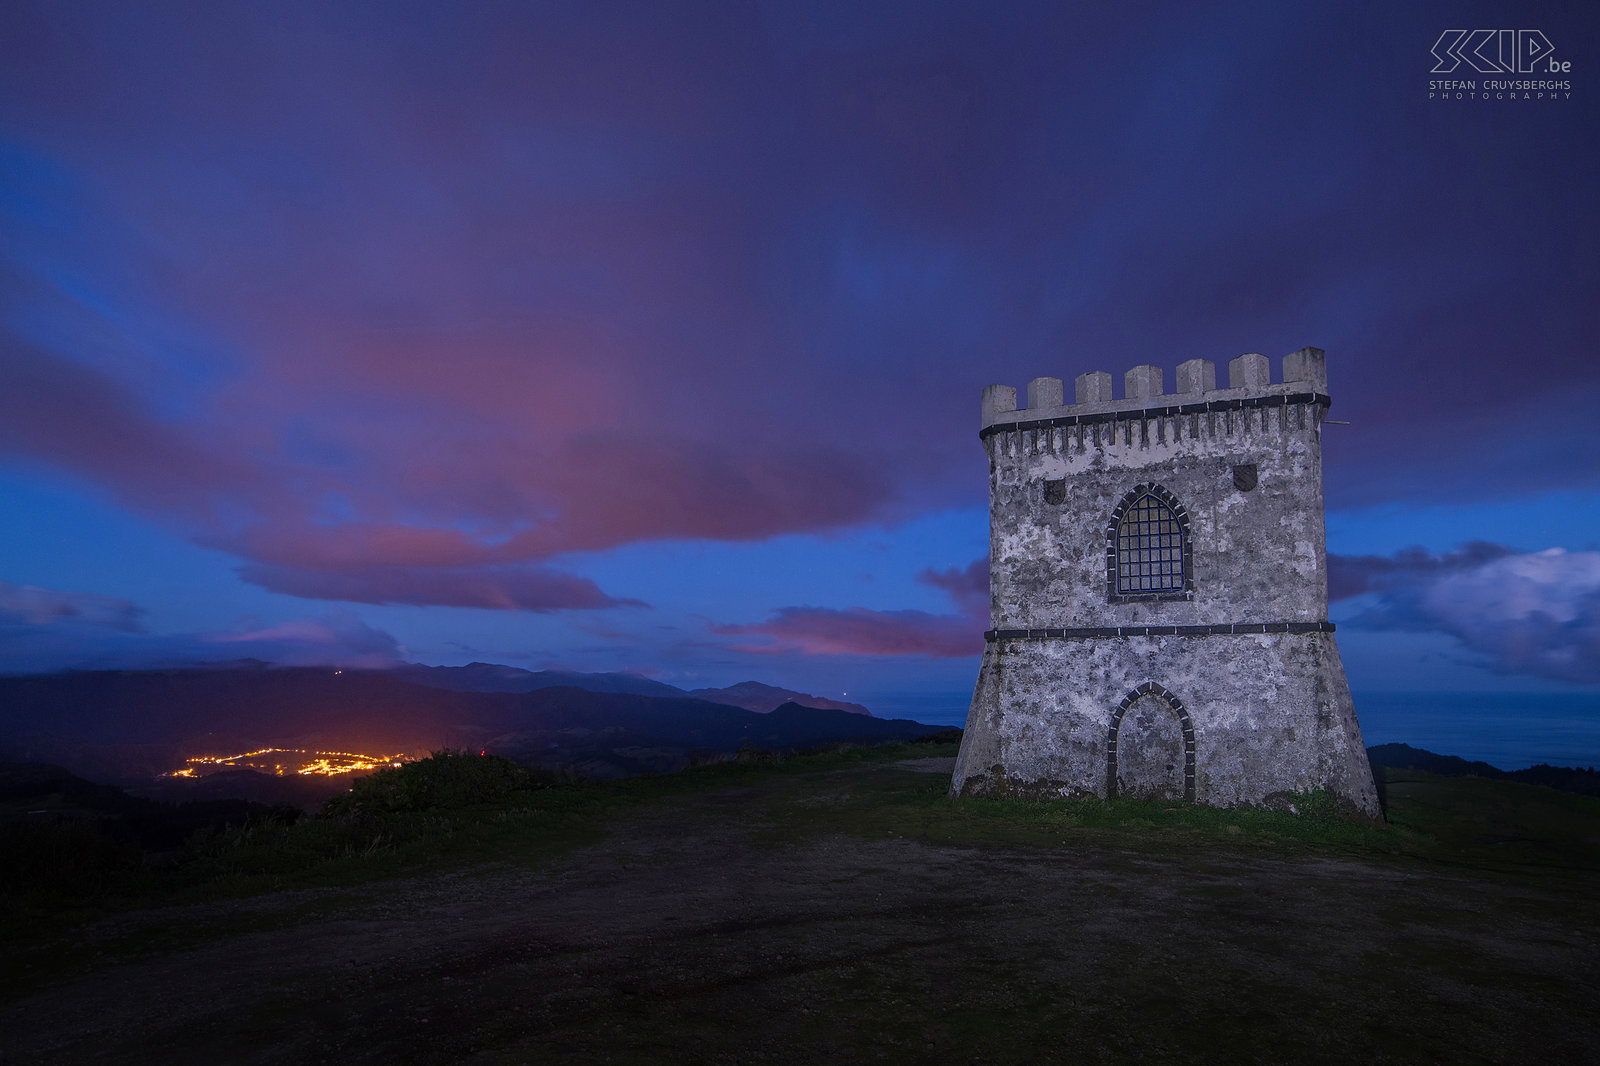 Castelo Branco and Furnas Night photo of the tower of Castelo Branco. From the hilltop you can see the lights of the village of Furnas. Stefan Cruysberghs